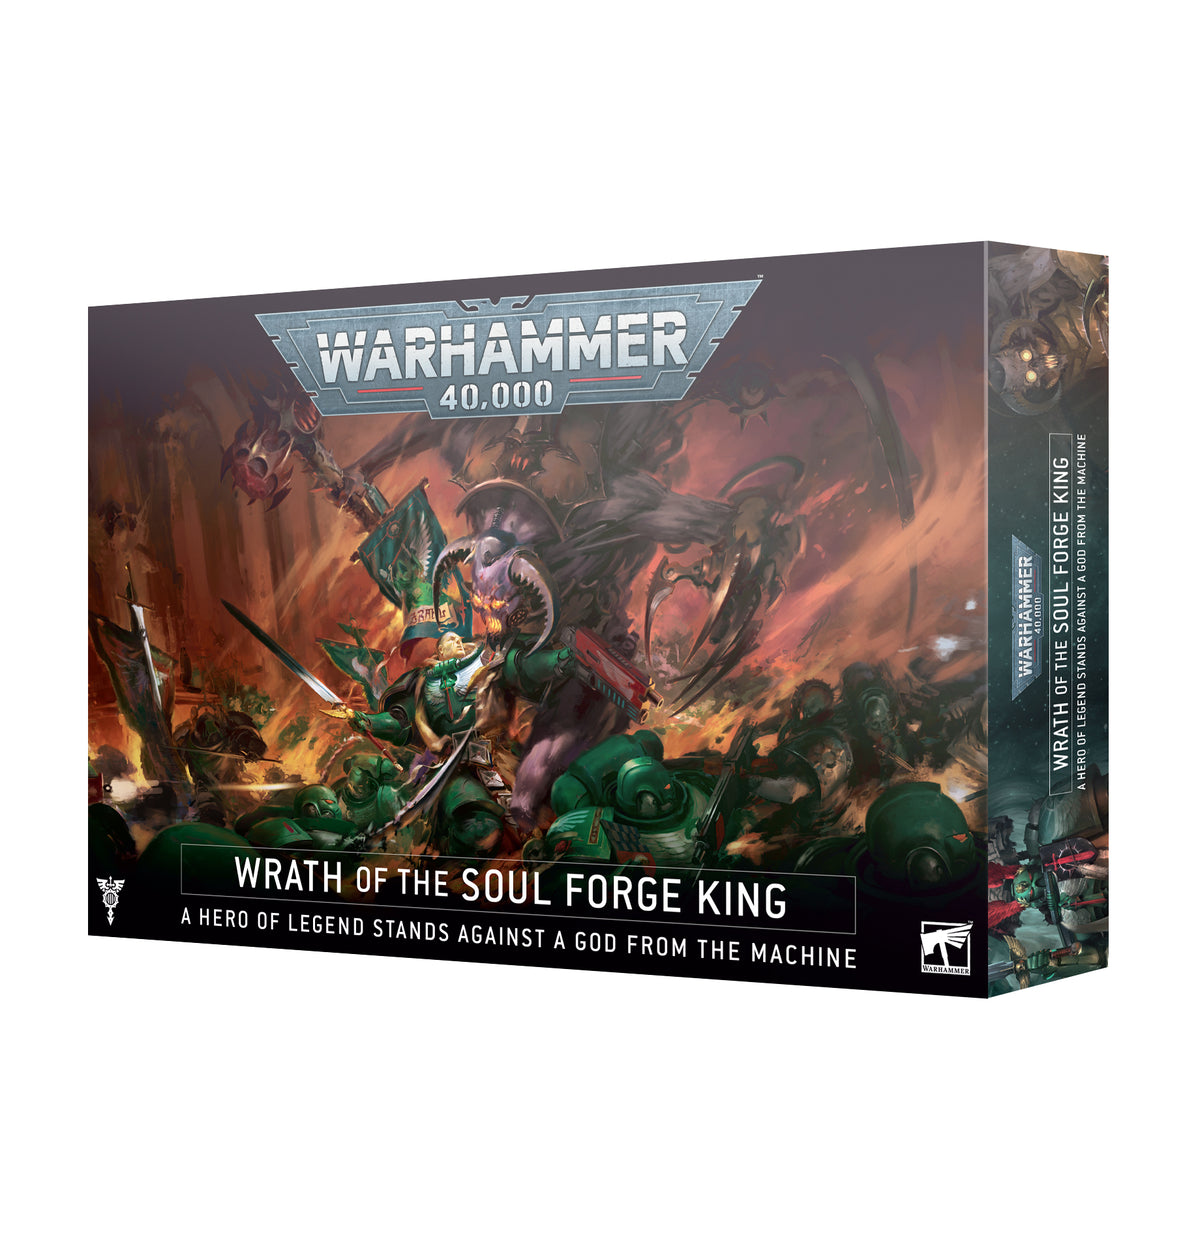 Wrath of the Soul Forge King (Warhammer 40,000)